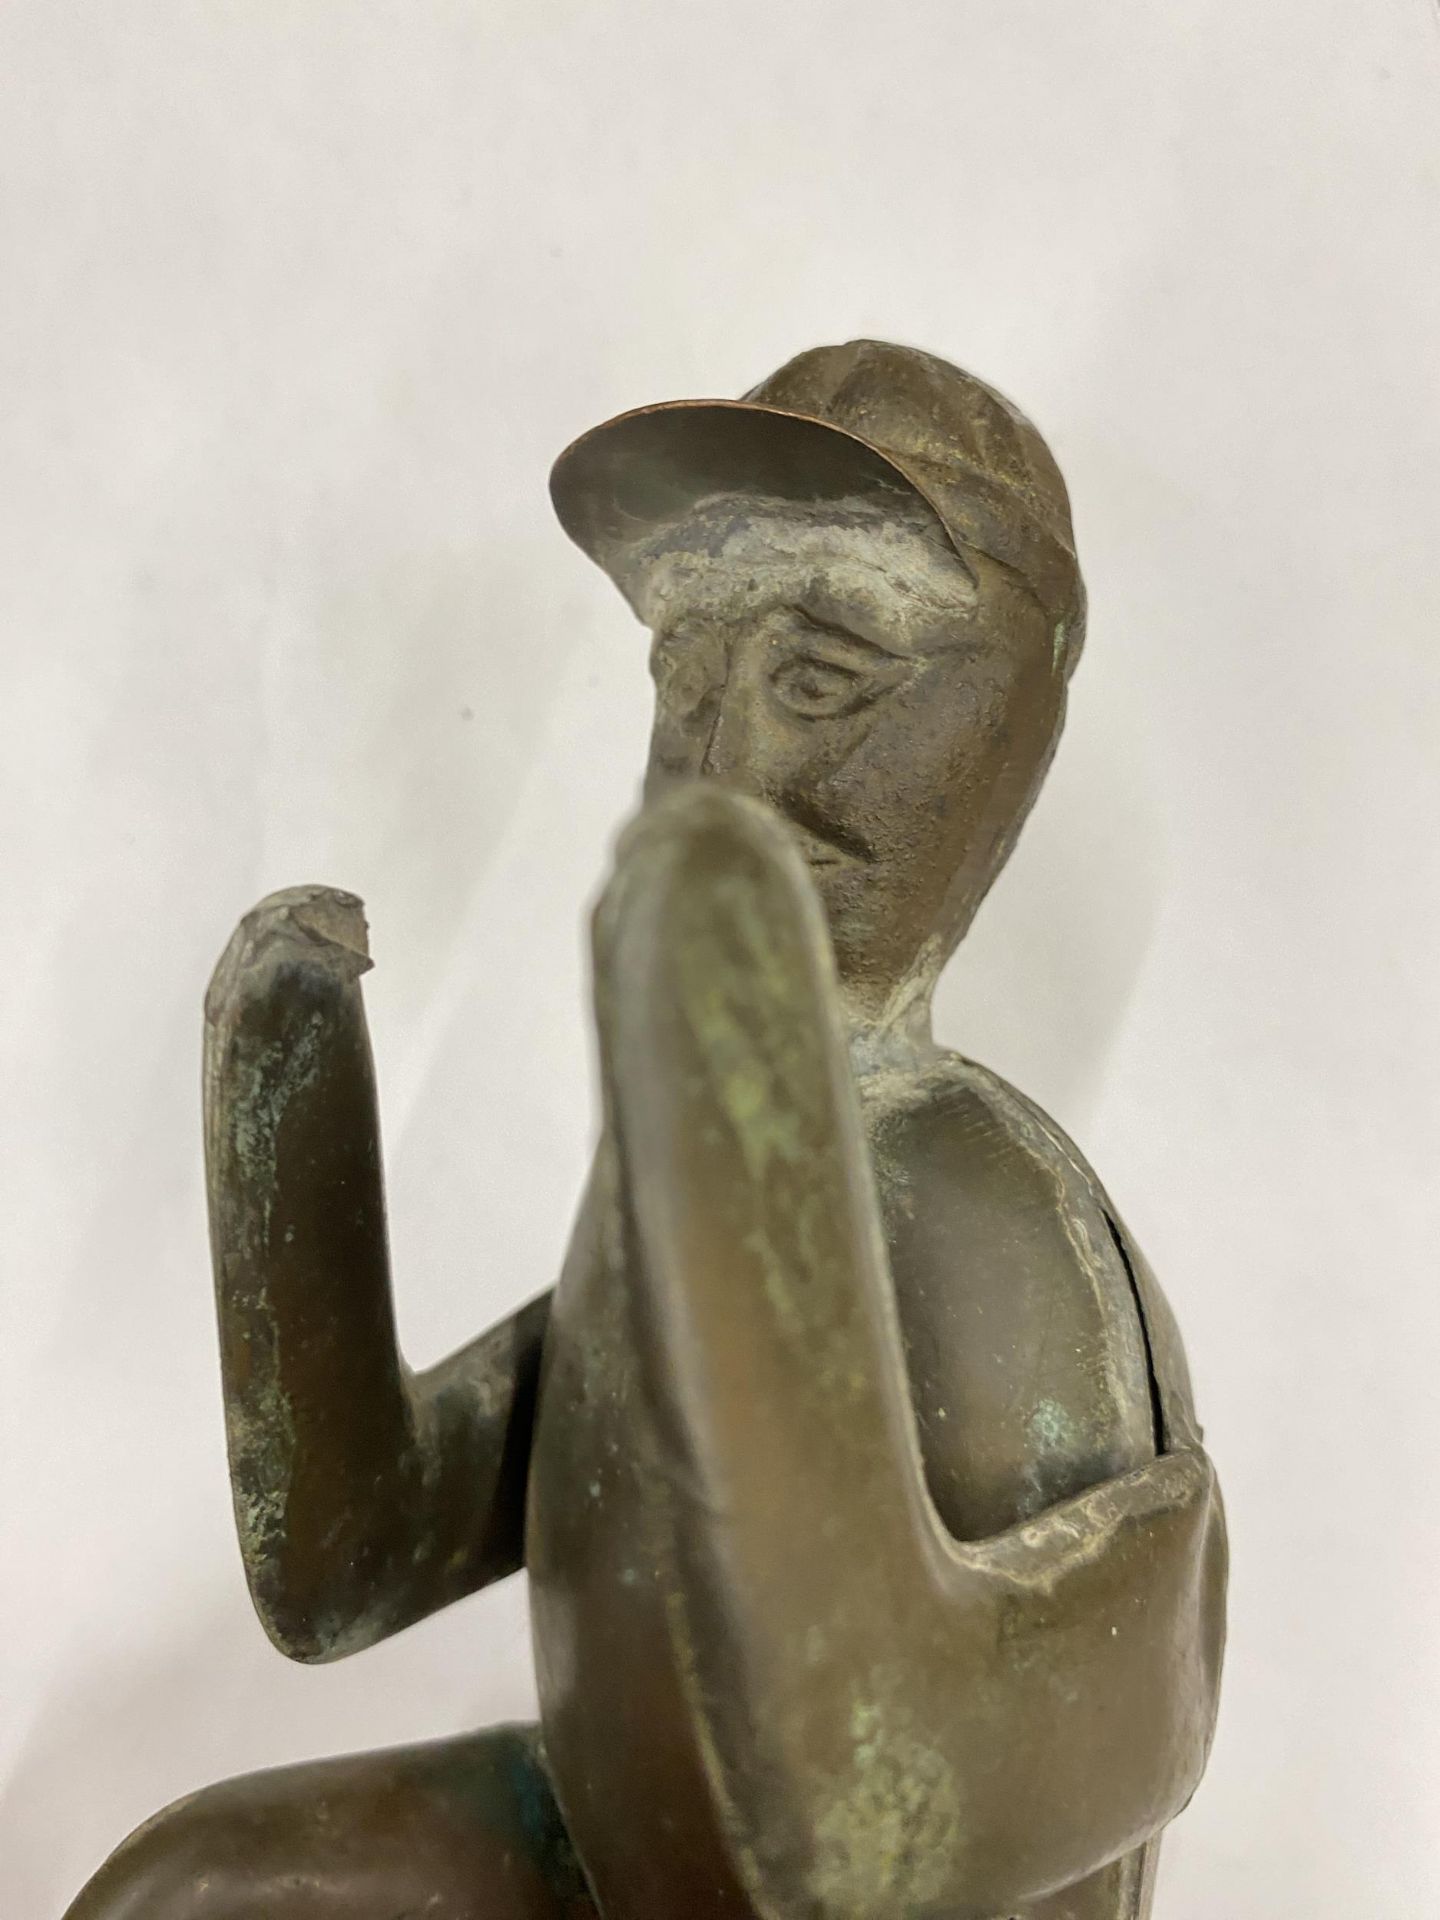 A VINTAGE COPPER MODEL OF A JOCKEY FROM A WEATHER VANE - Image 2 of 3